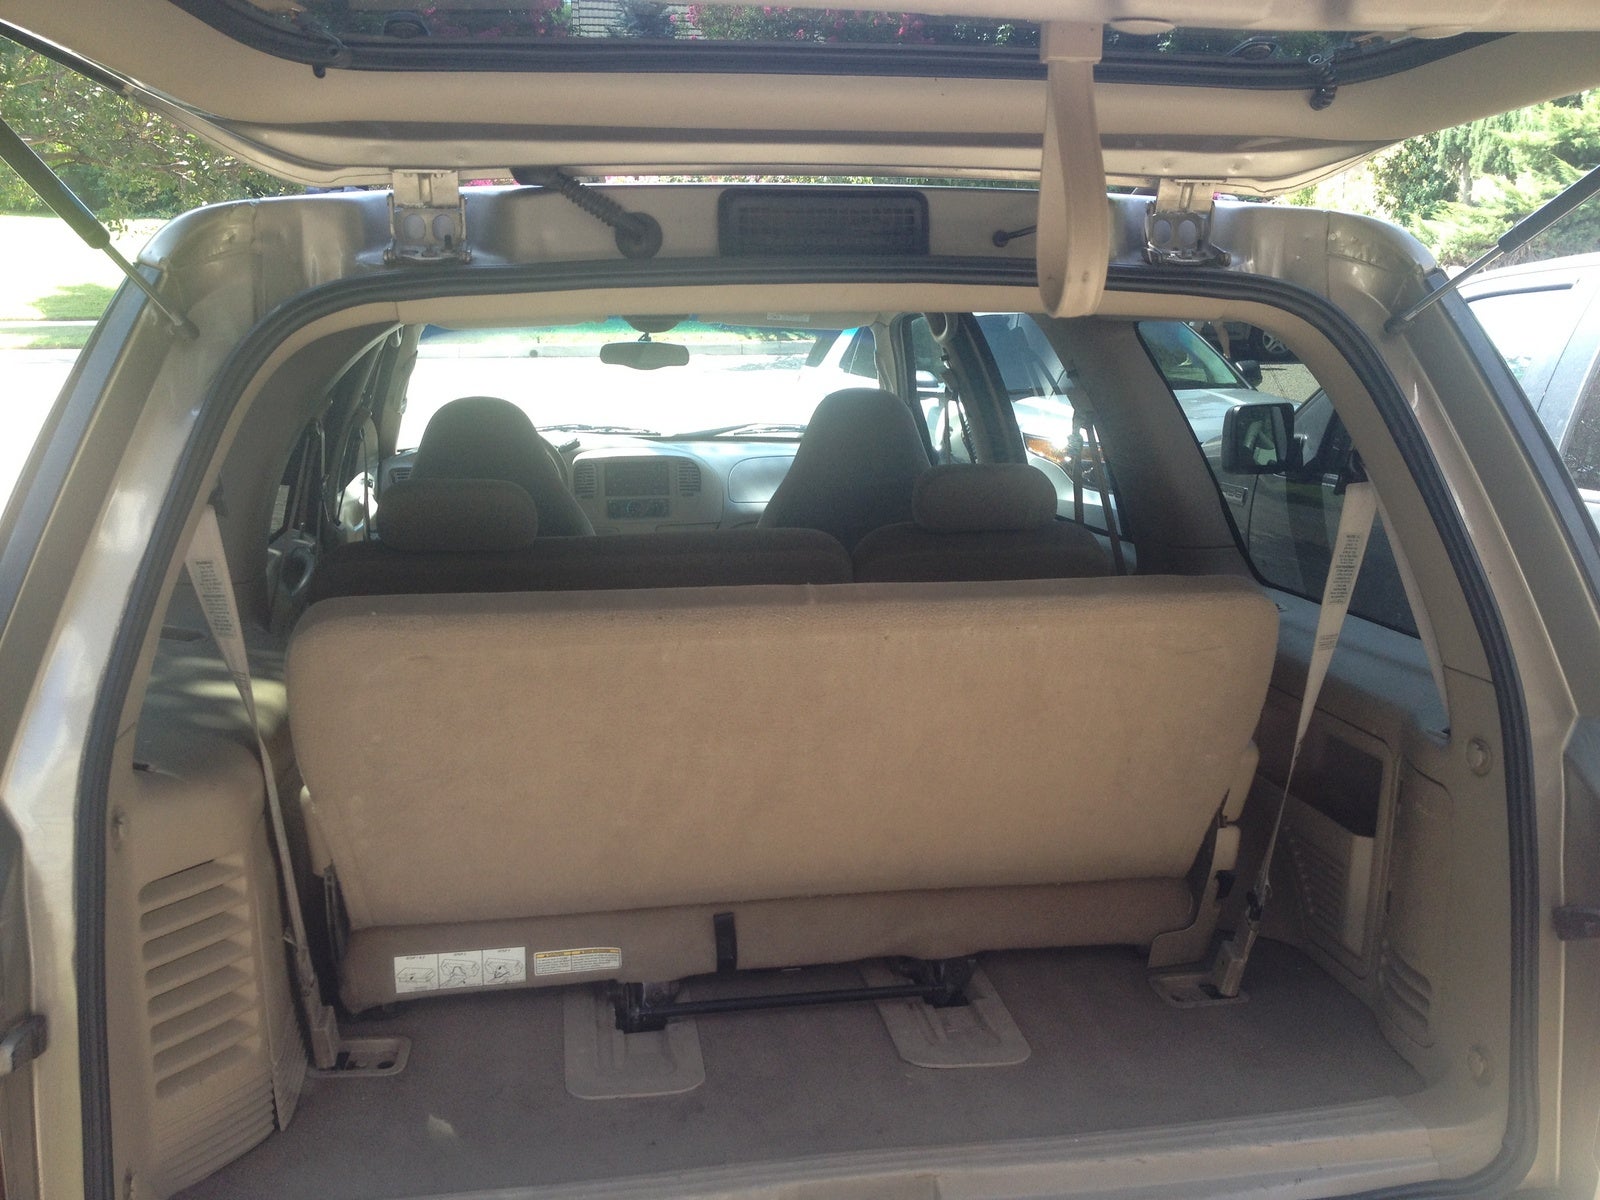 2001 Ford expedition interior dimensions